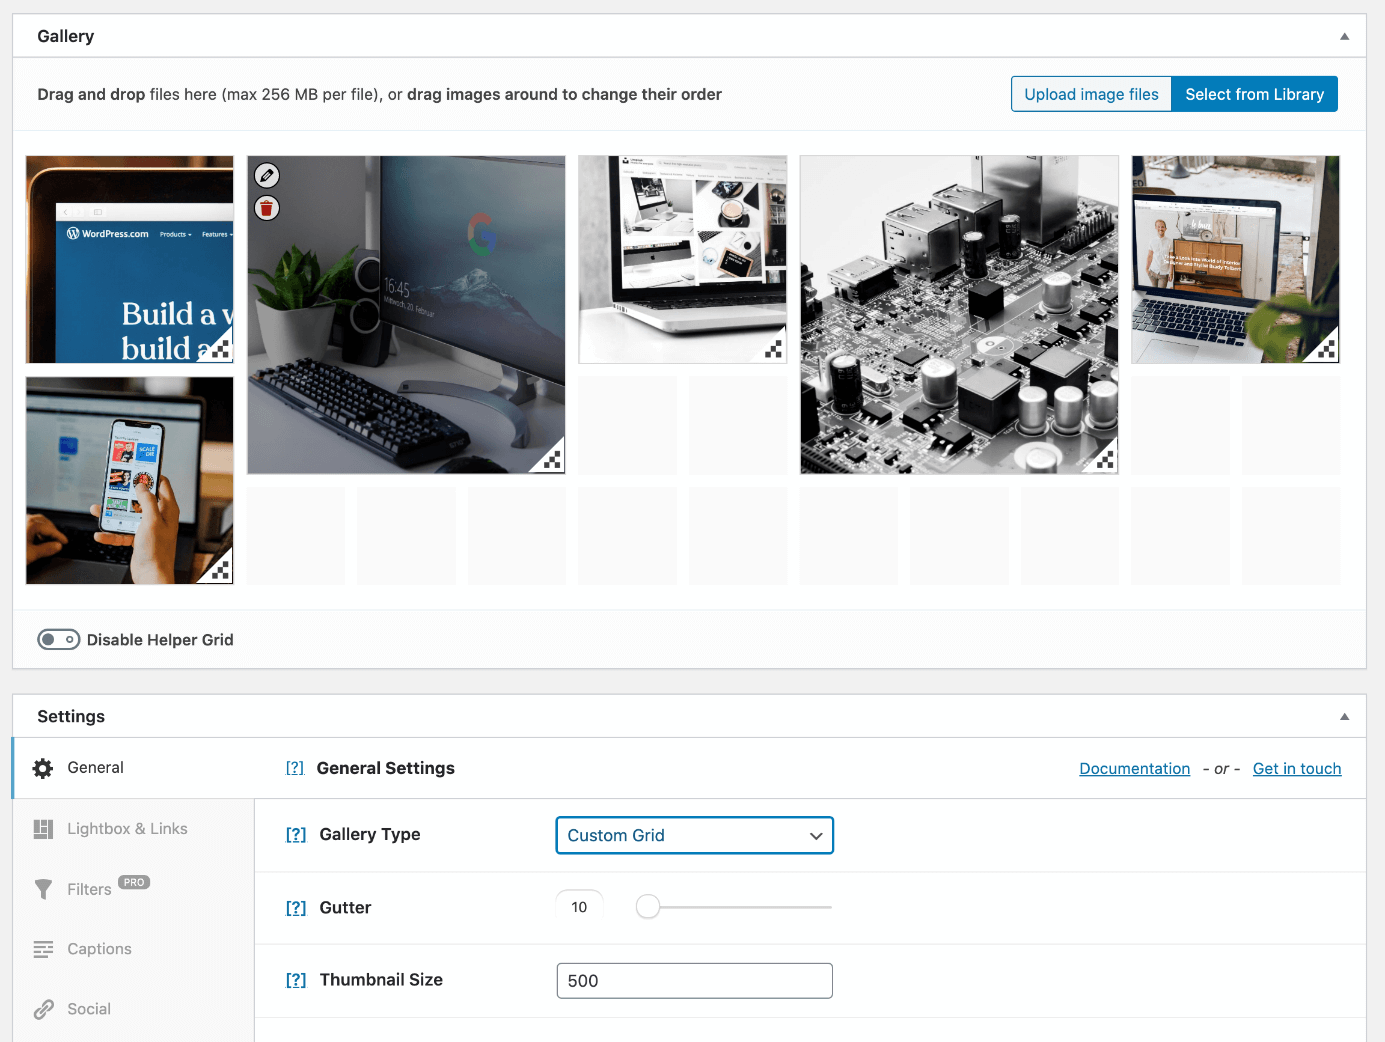 When using the custom grid gallery type, you can individually customize the sizes of your images